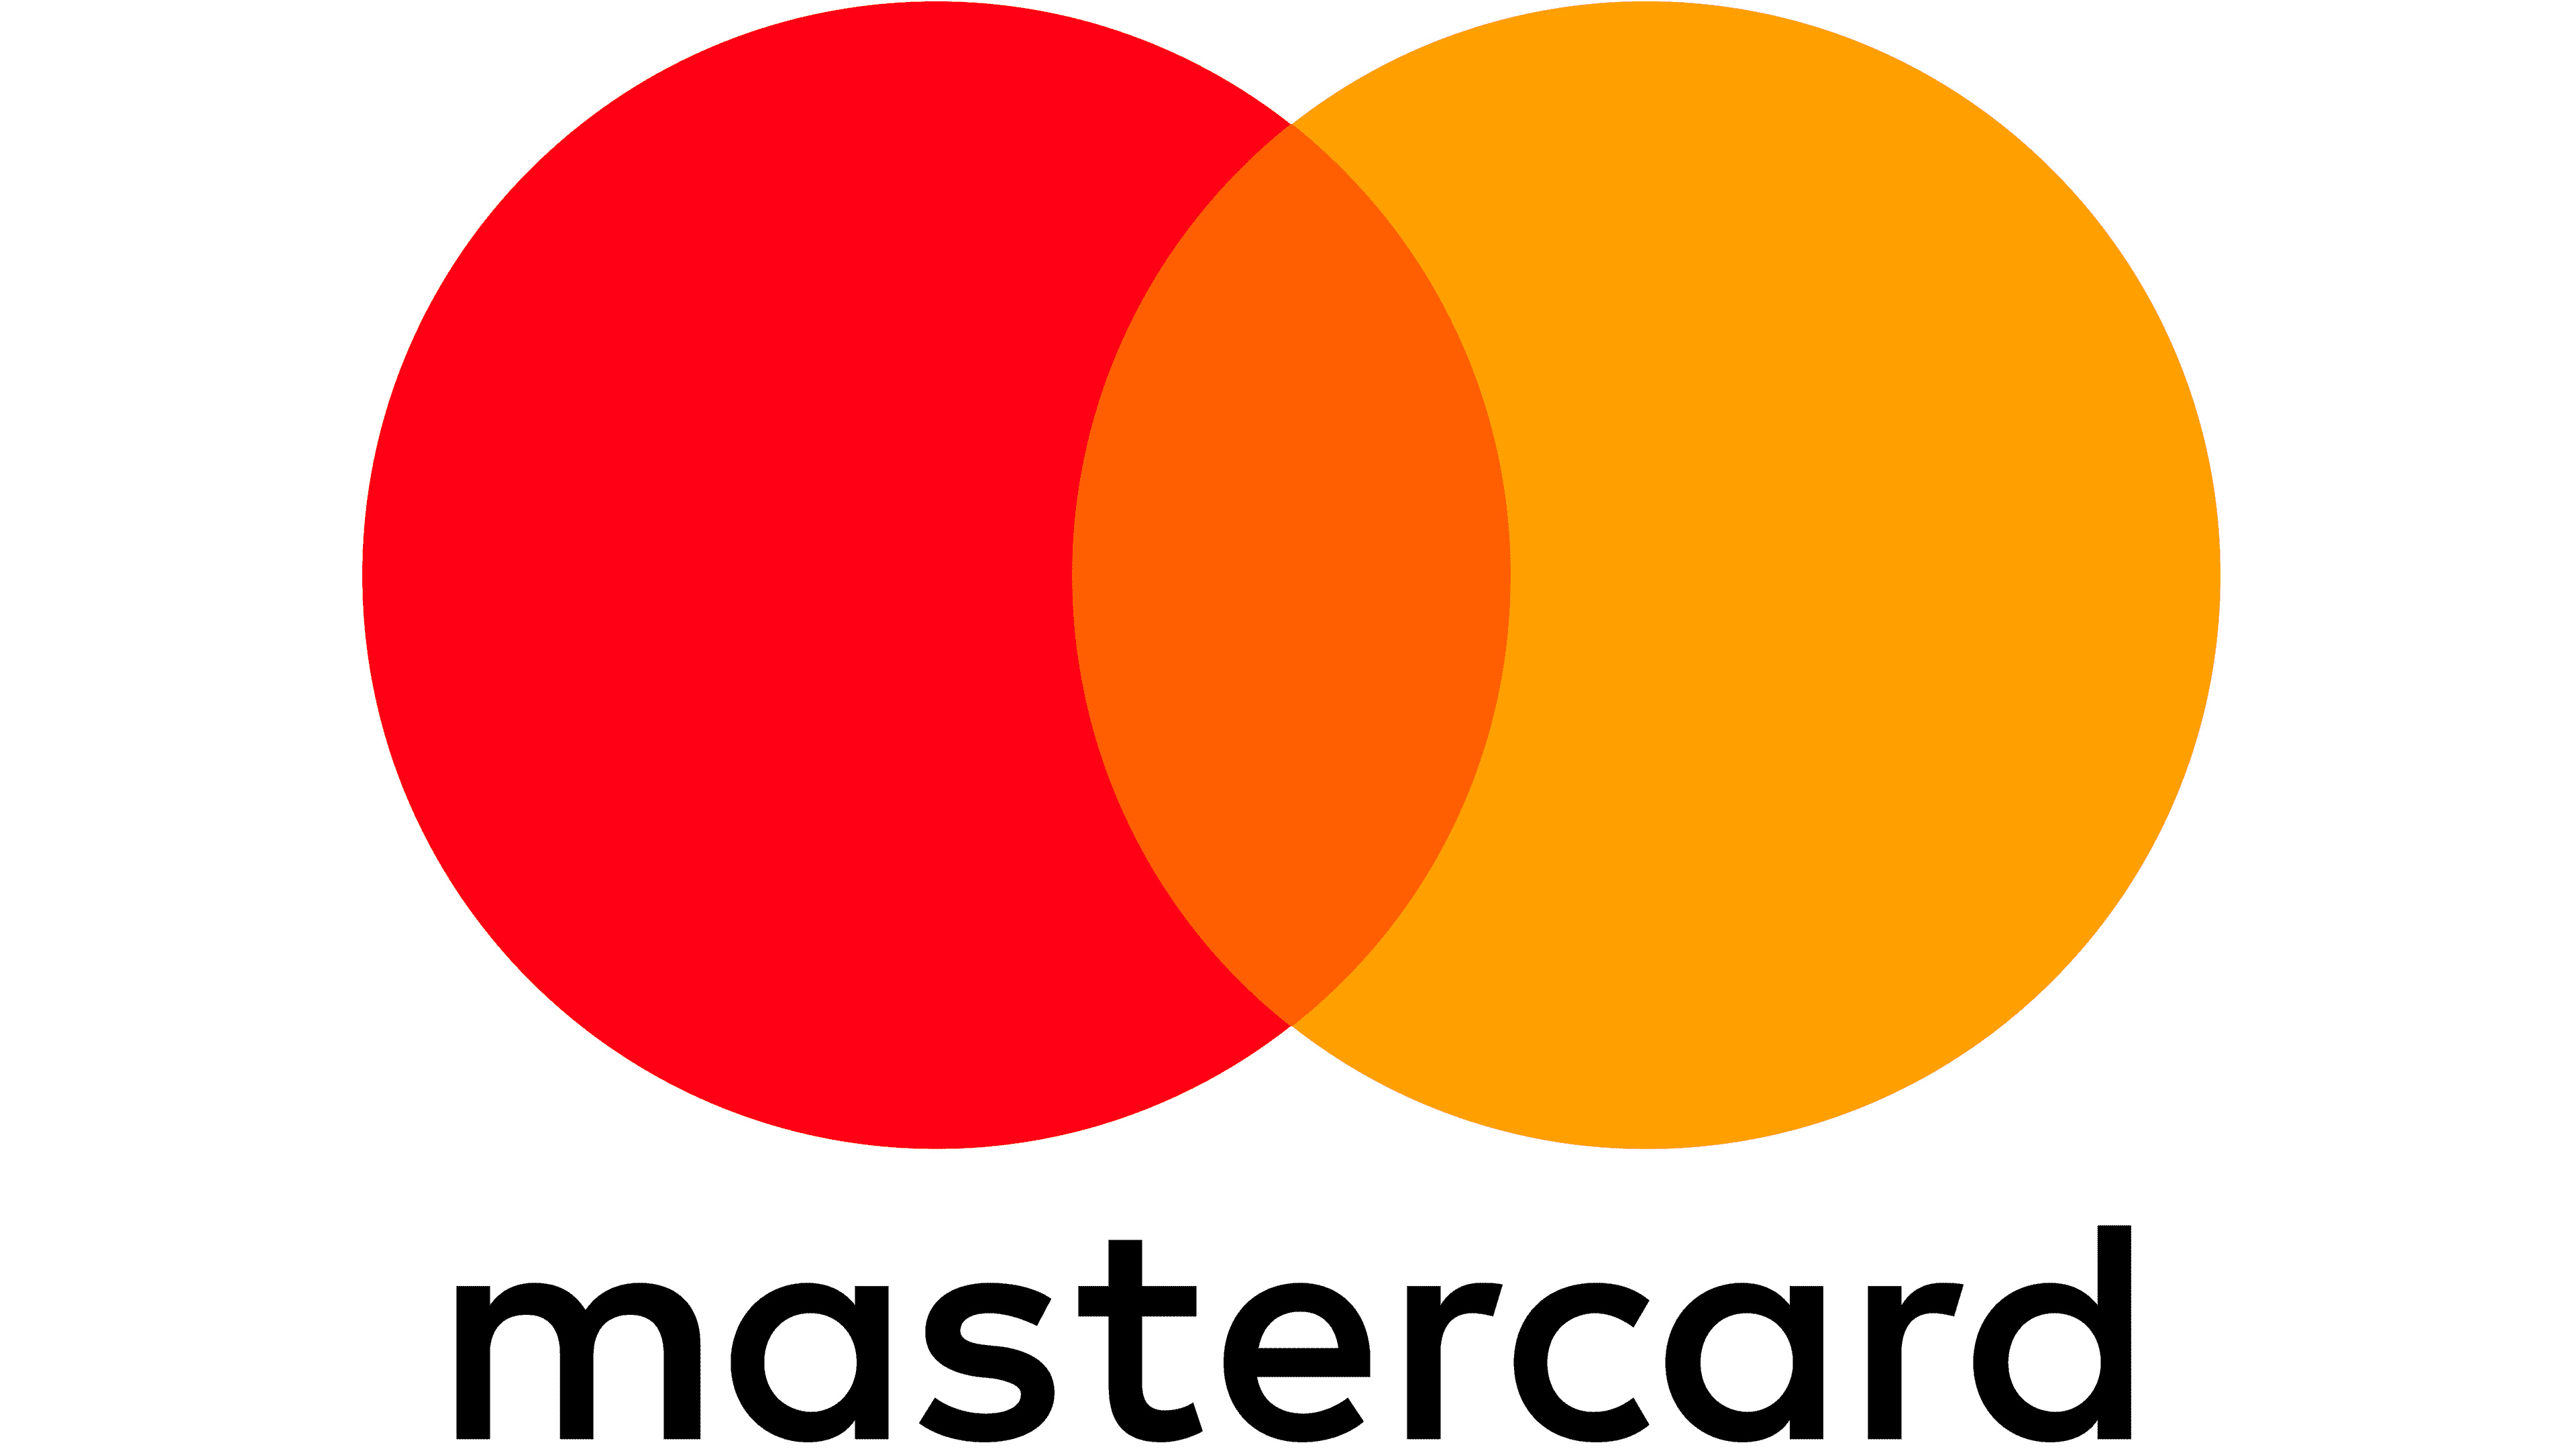 Mastercard: Debit, credit and prepaid cards for making purchases, Logo, US company. 3840x2160 4K Background.